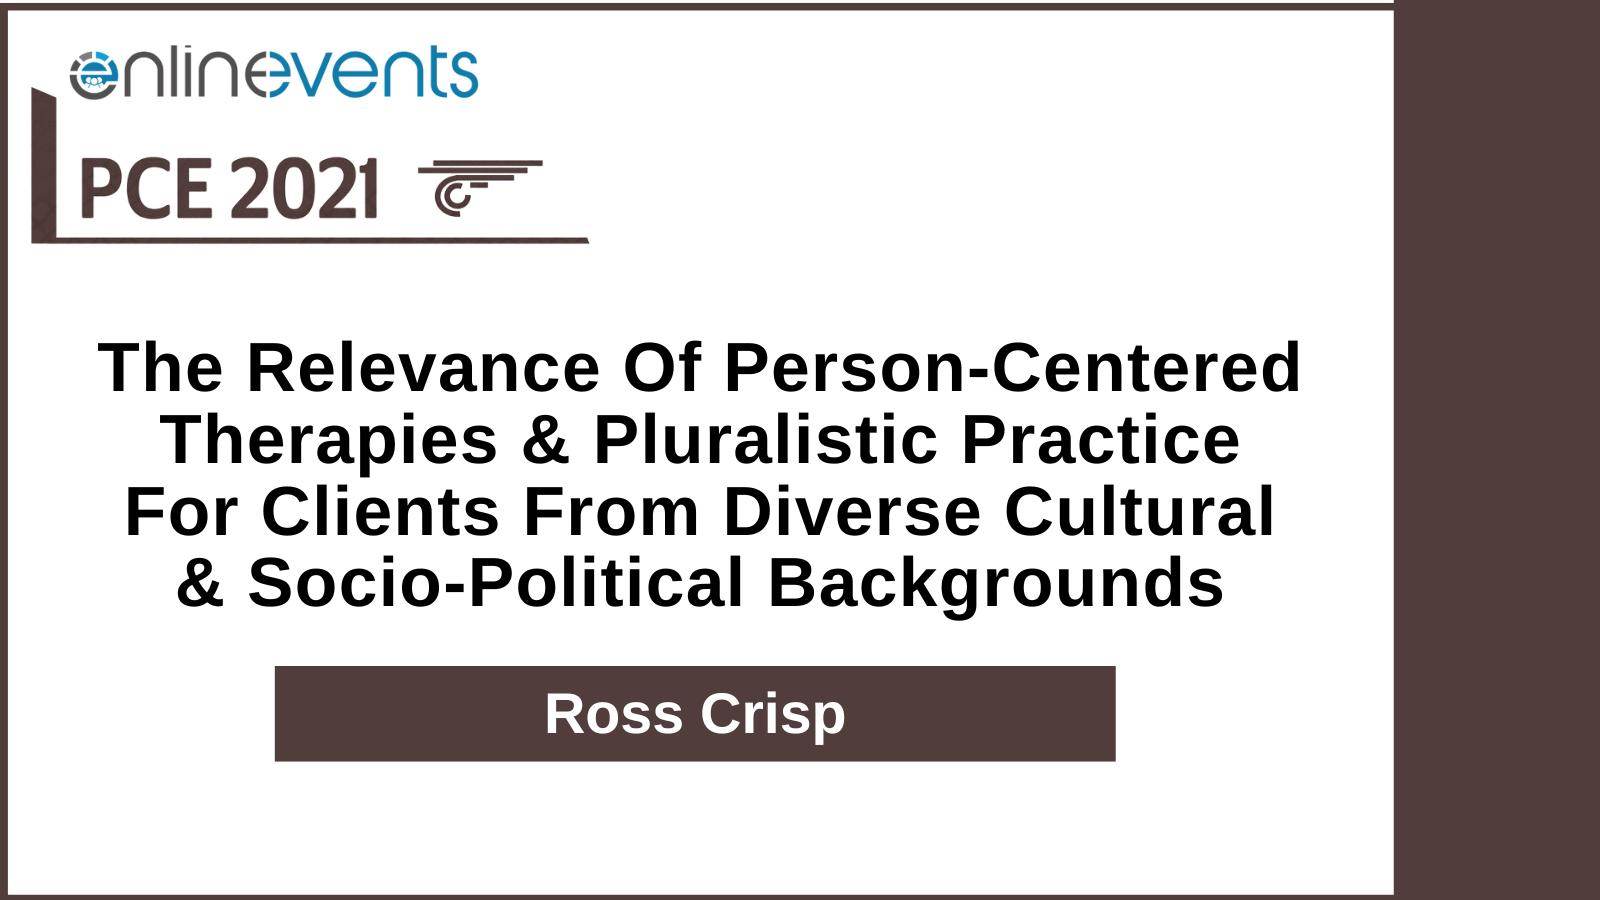 The Relevance Of Person-Centered Therapies And Pluralistic Practice For Clients From Diverse Cultural And Socio-Political Backgrounds – Ross Crisp